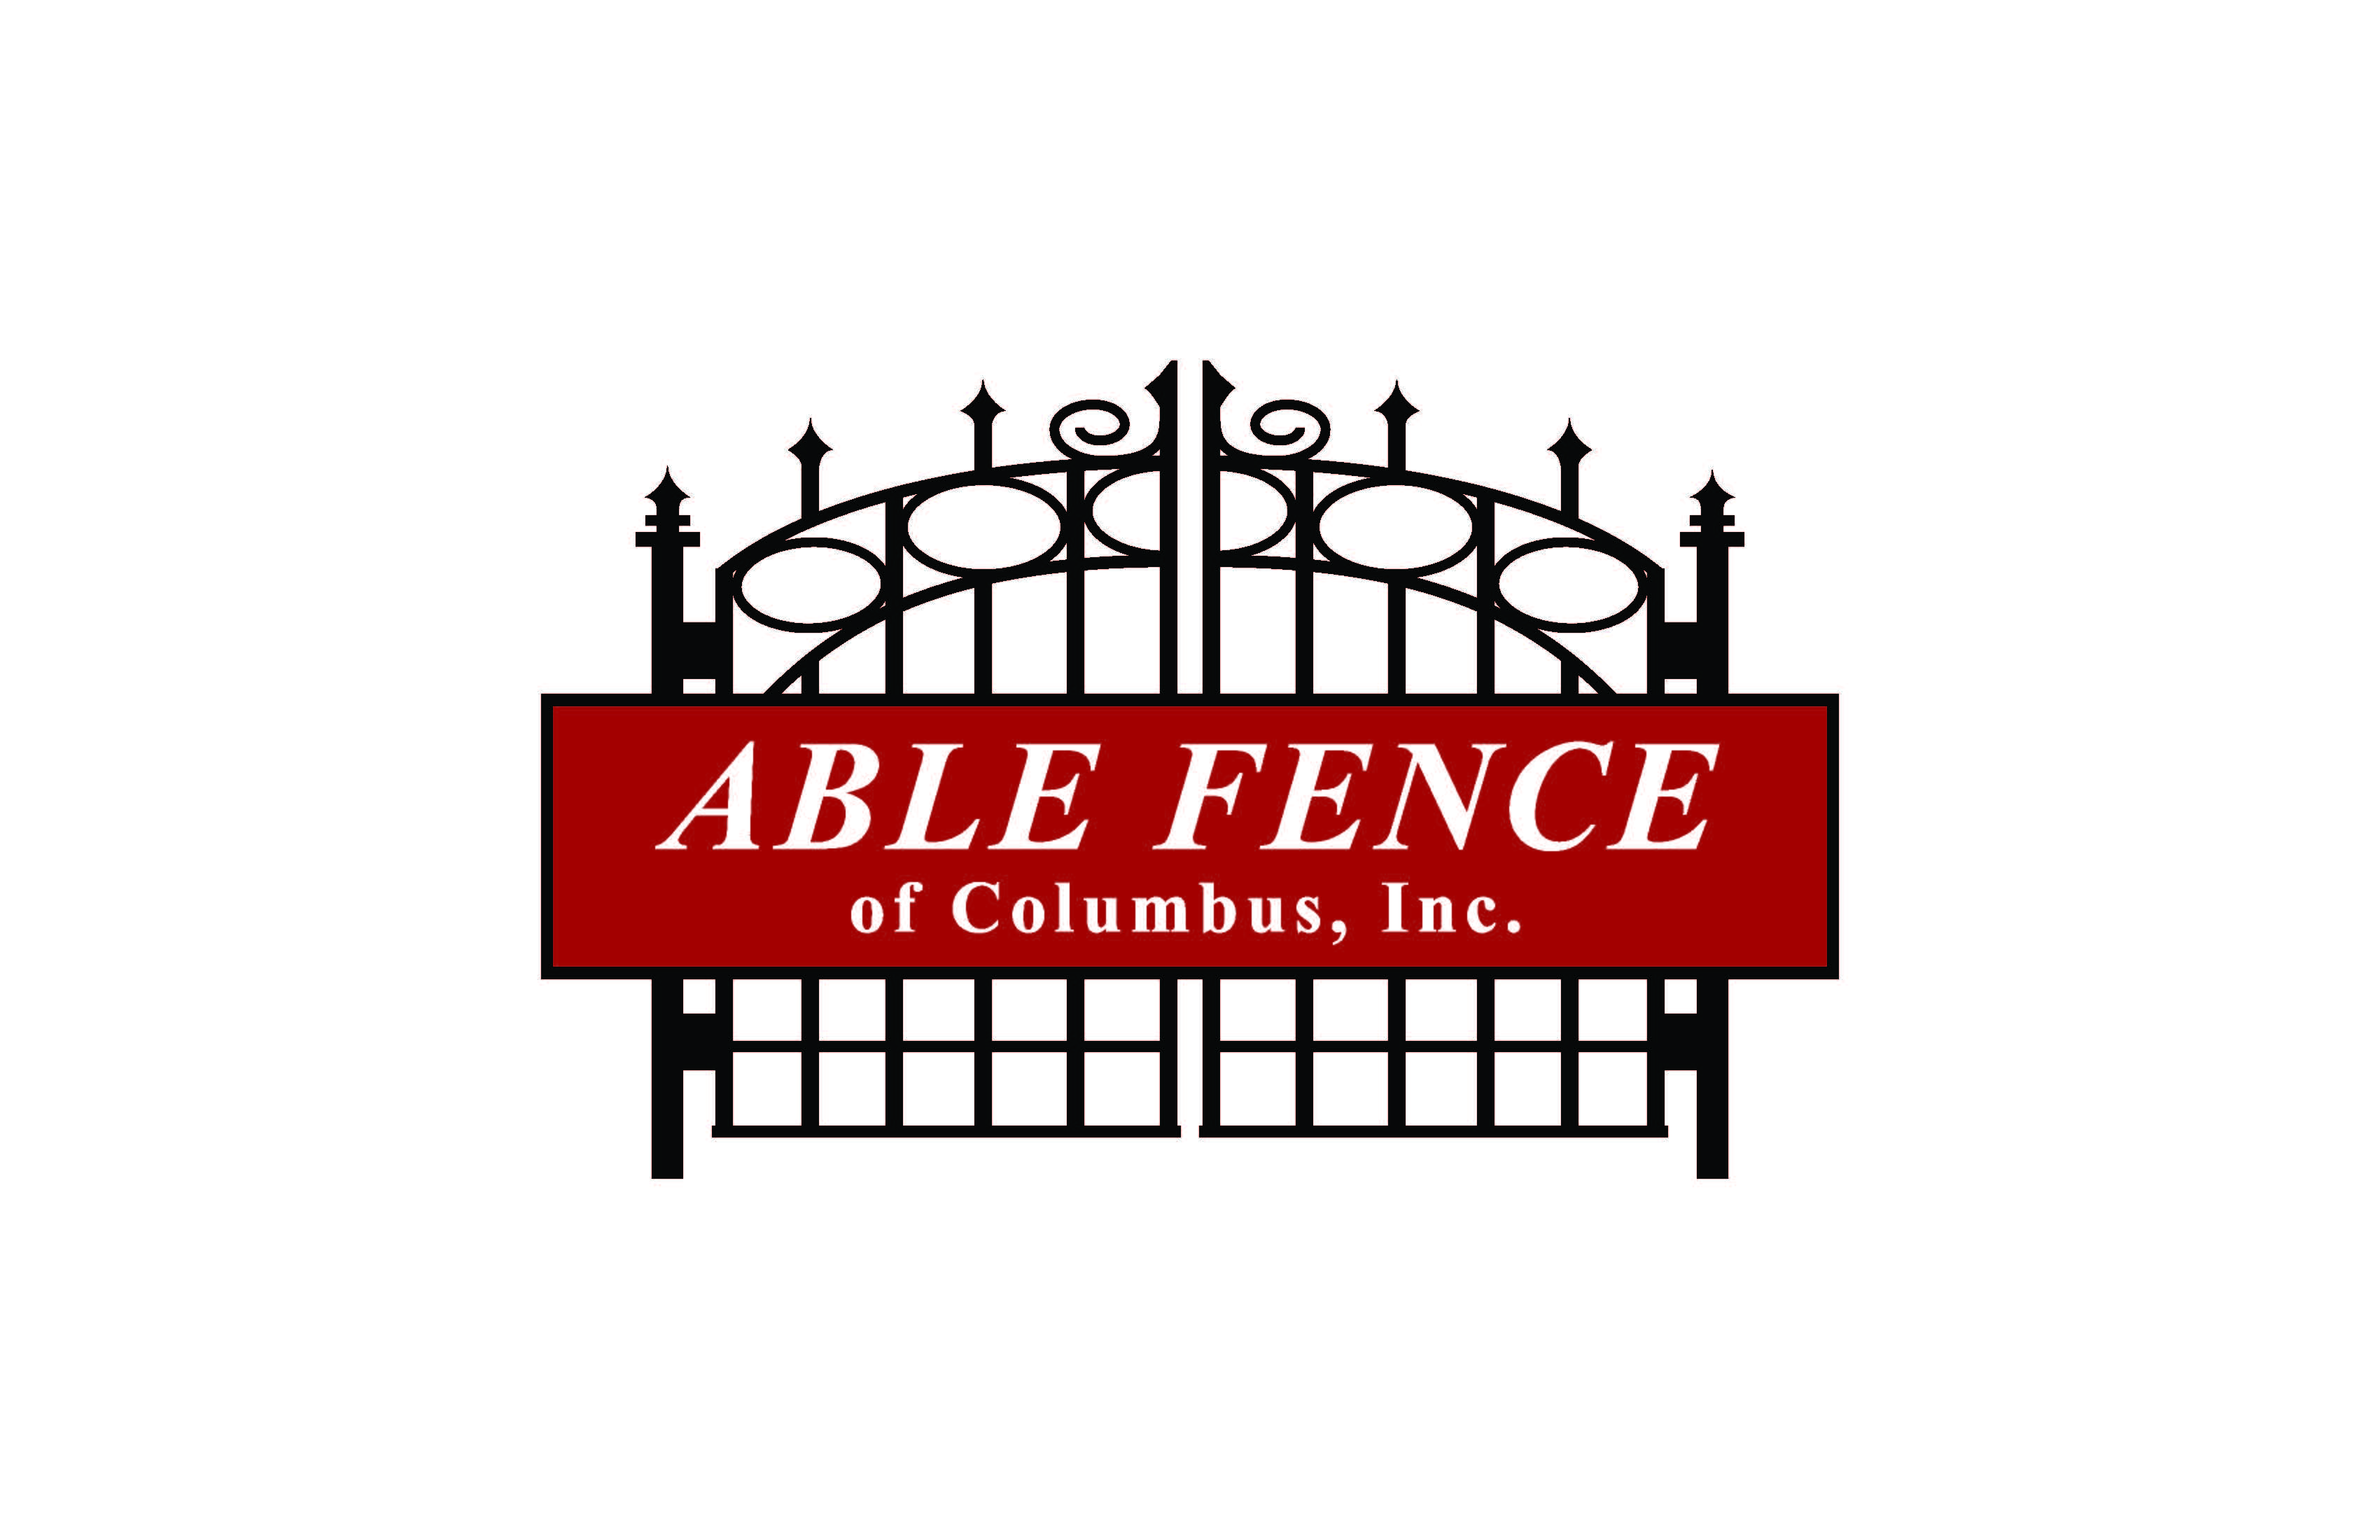 Able Fence of Columbus